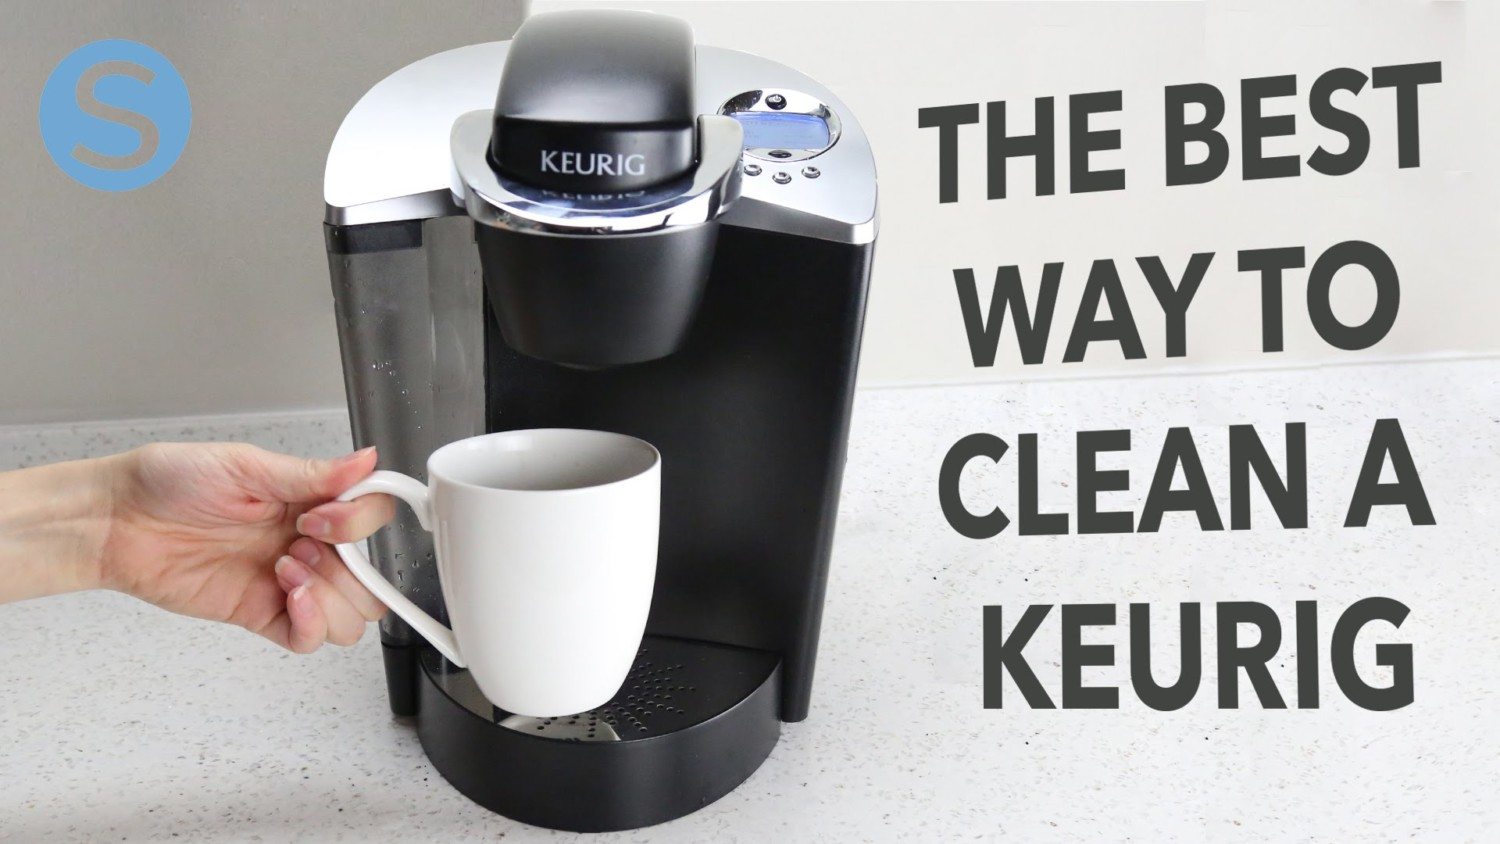 How To Clean A Keurig: The Most Efficient Way (Video